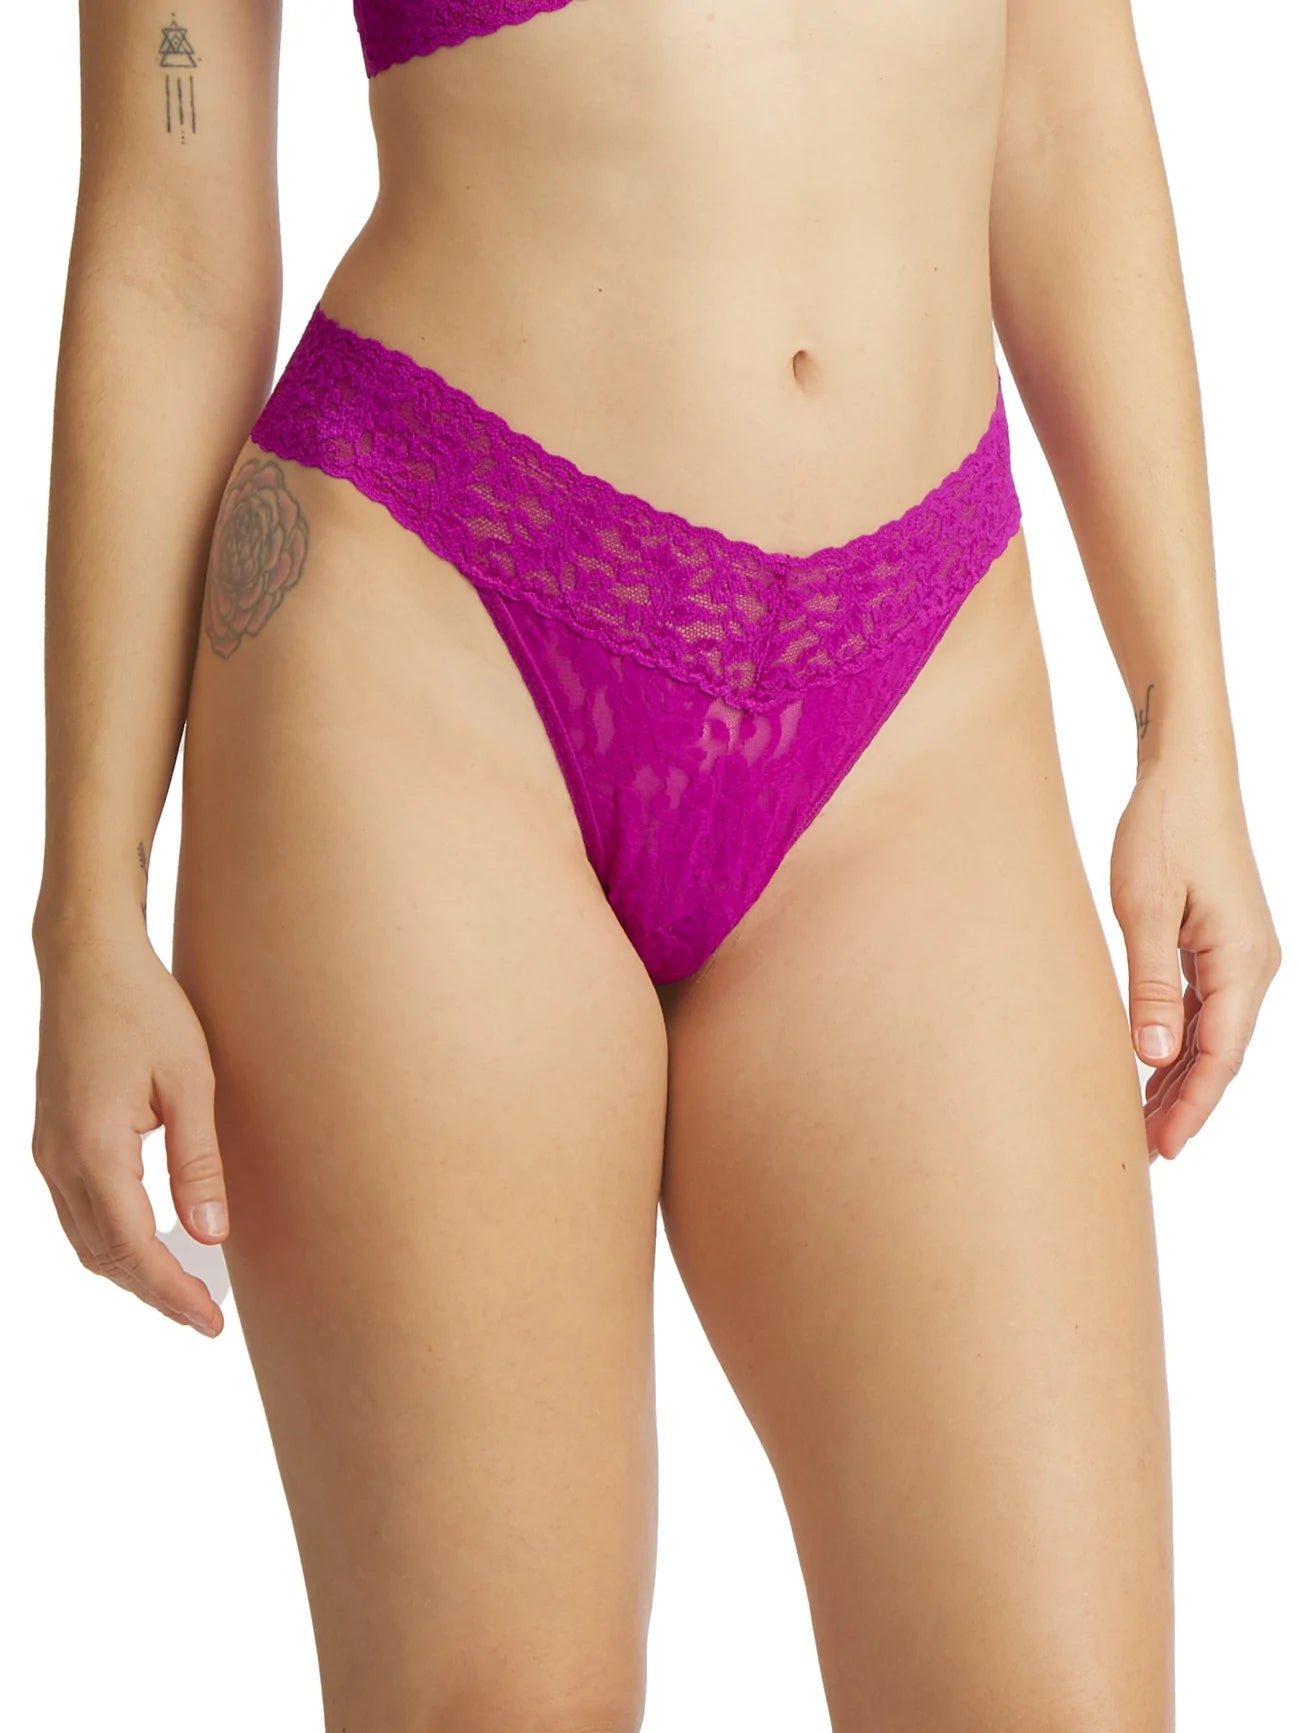 Hanky Panky Signature Lace Original Rise Thong-Packaged 4811p-19